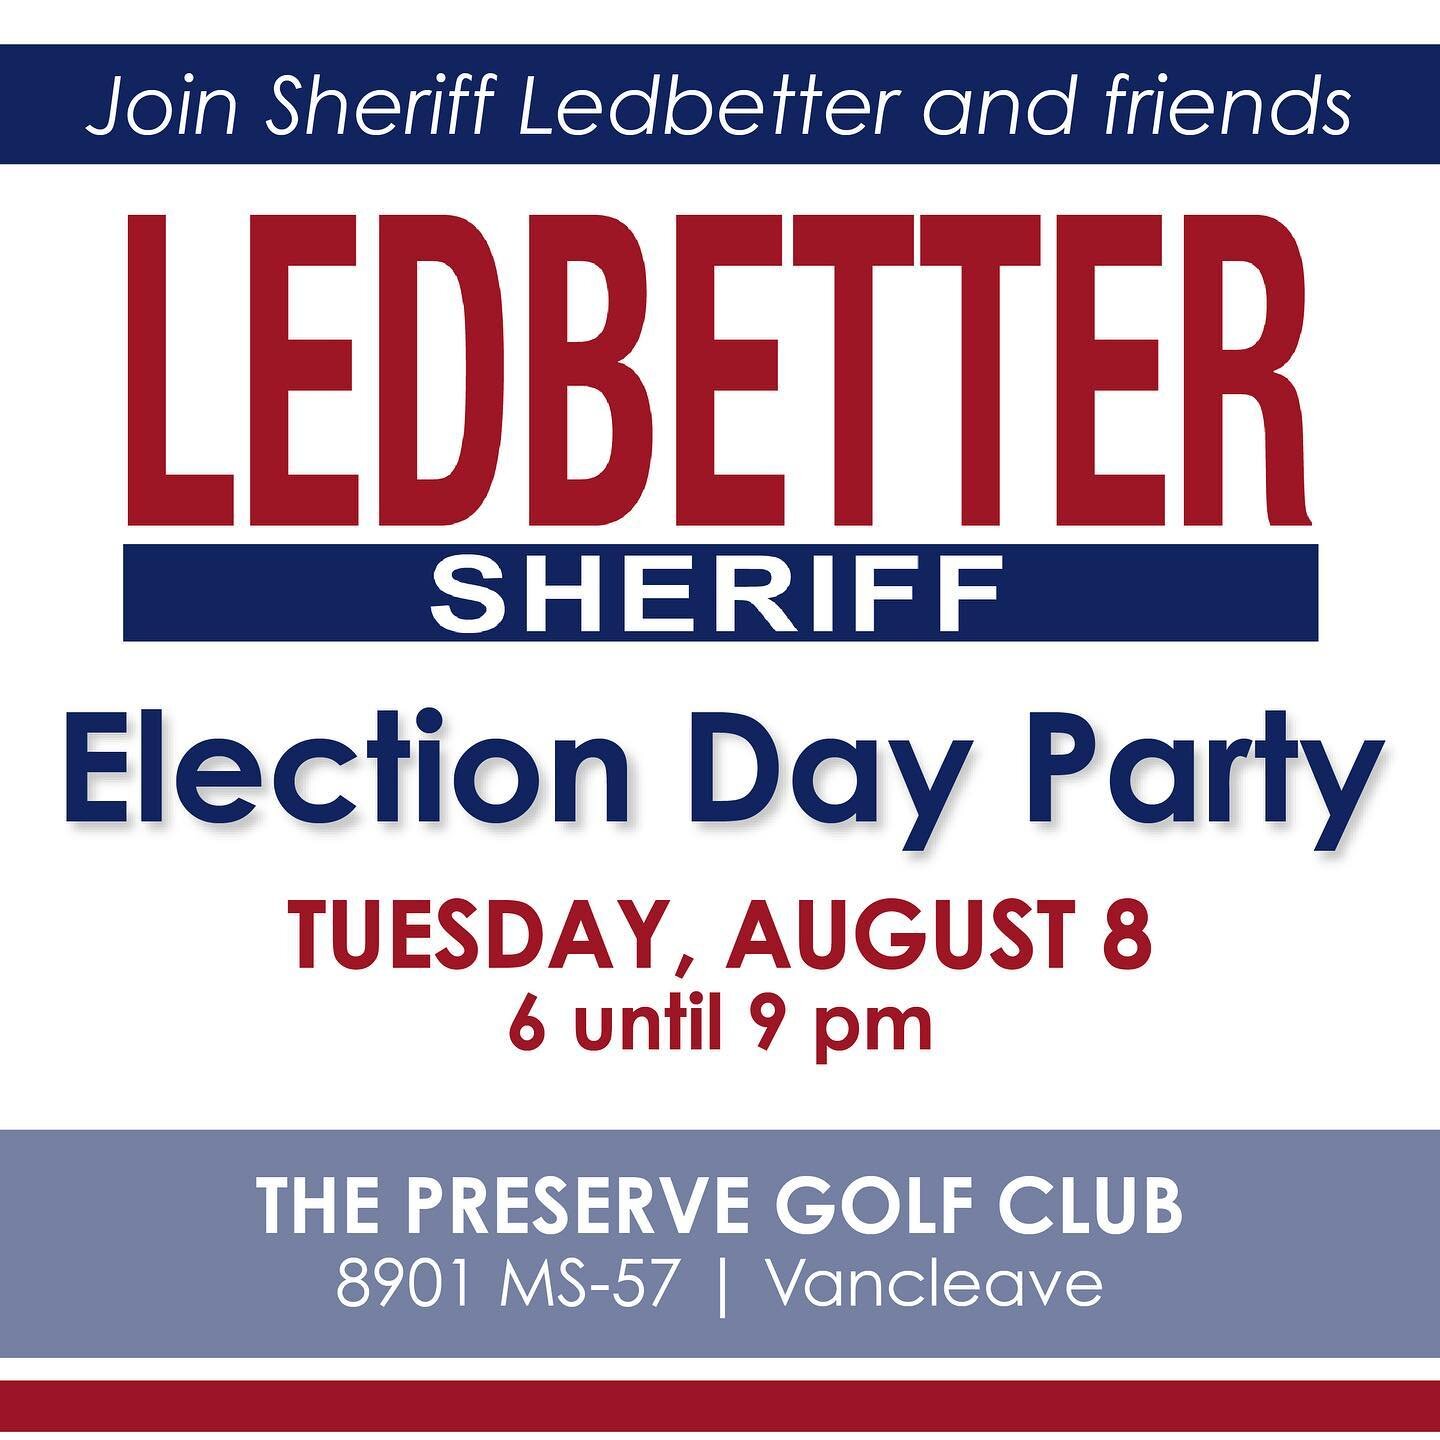 Join us tonight at The Preserve in Vancleave as we watch the results come in! #LetsKeepLedbetter